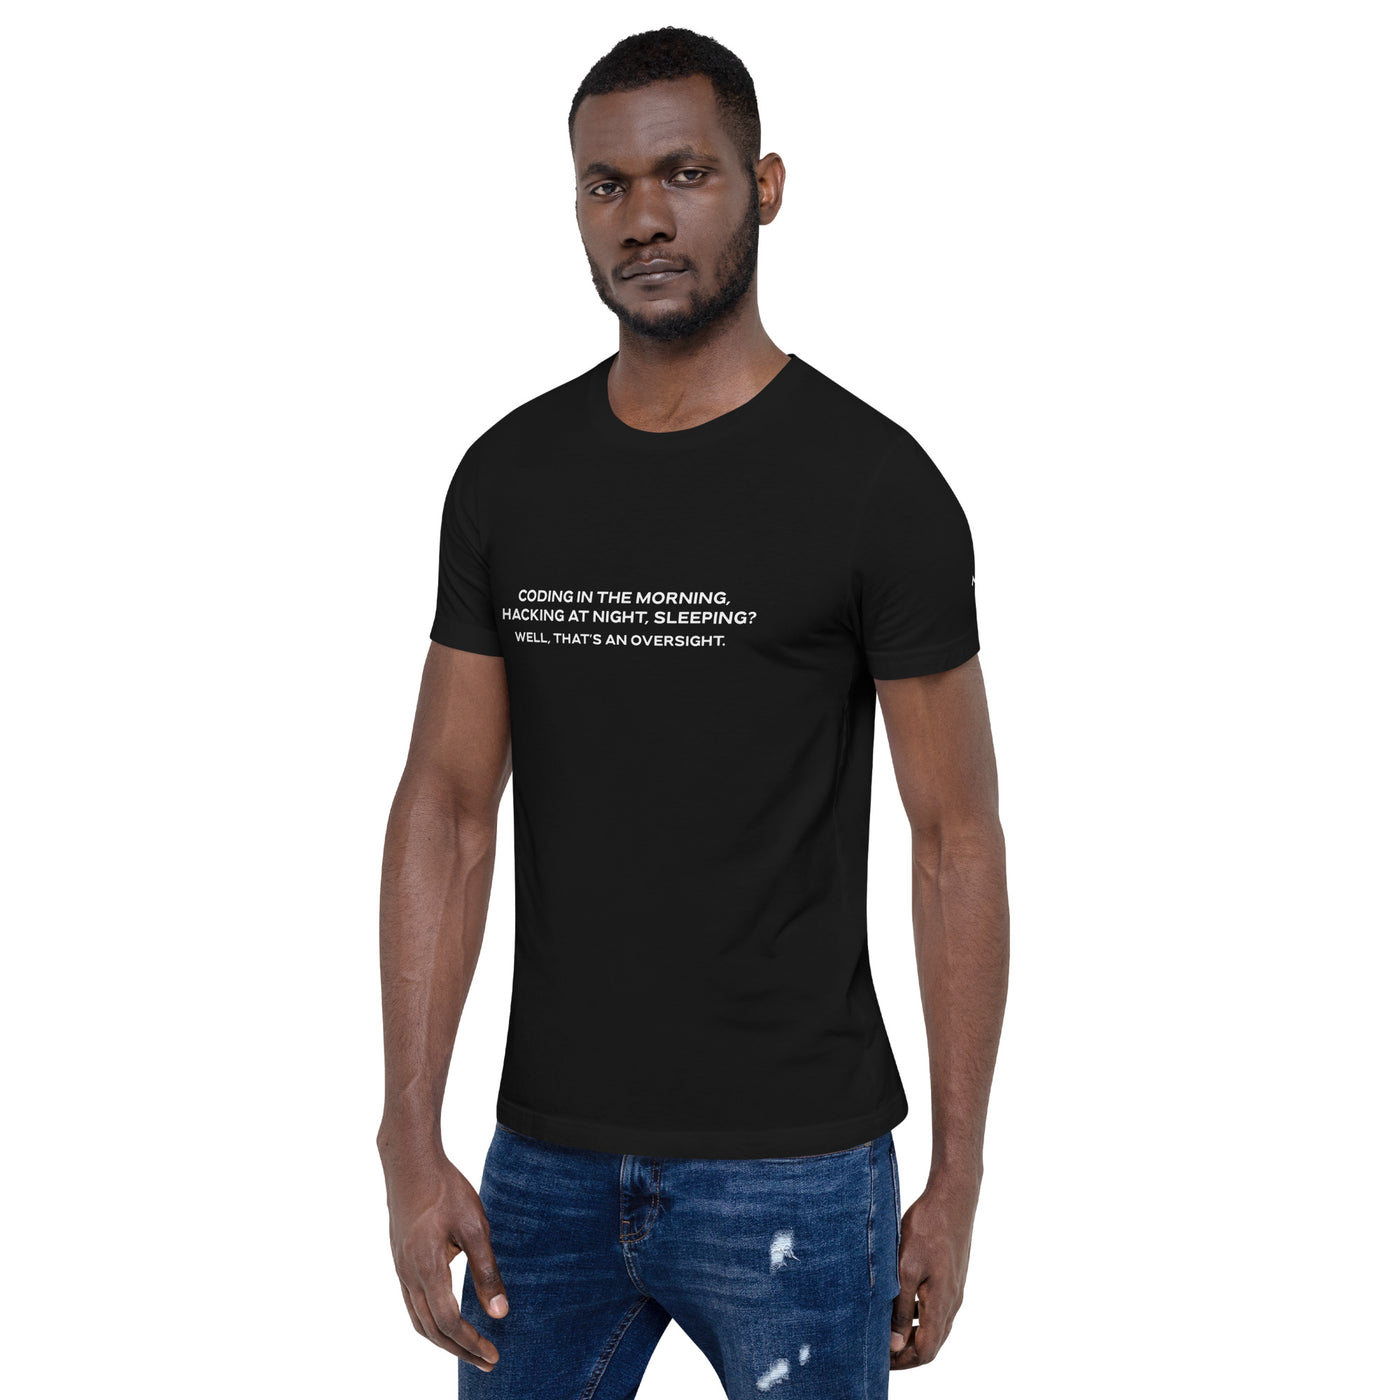 Coding in the morning, hacking at night V2 - Unisex t-shirt